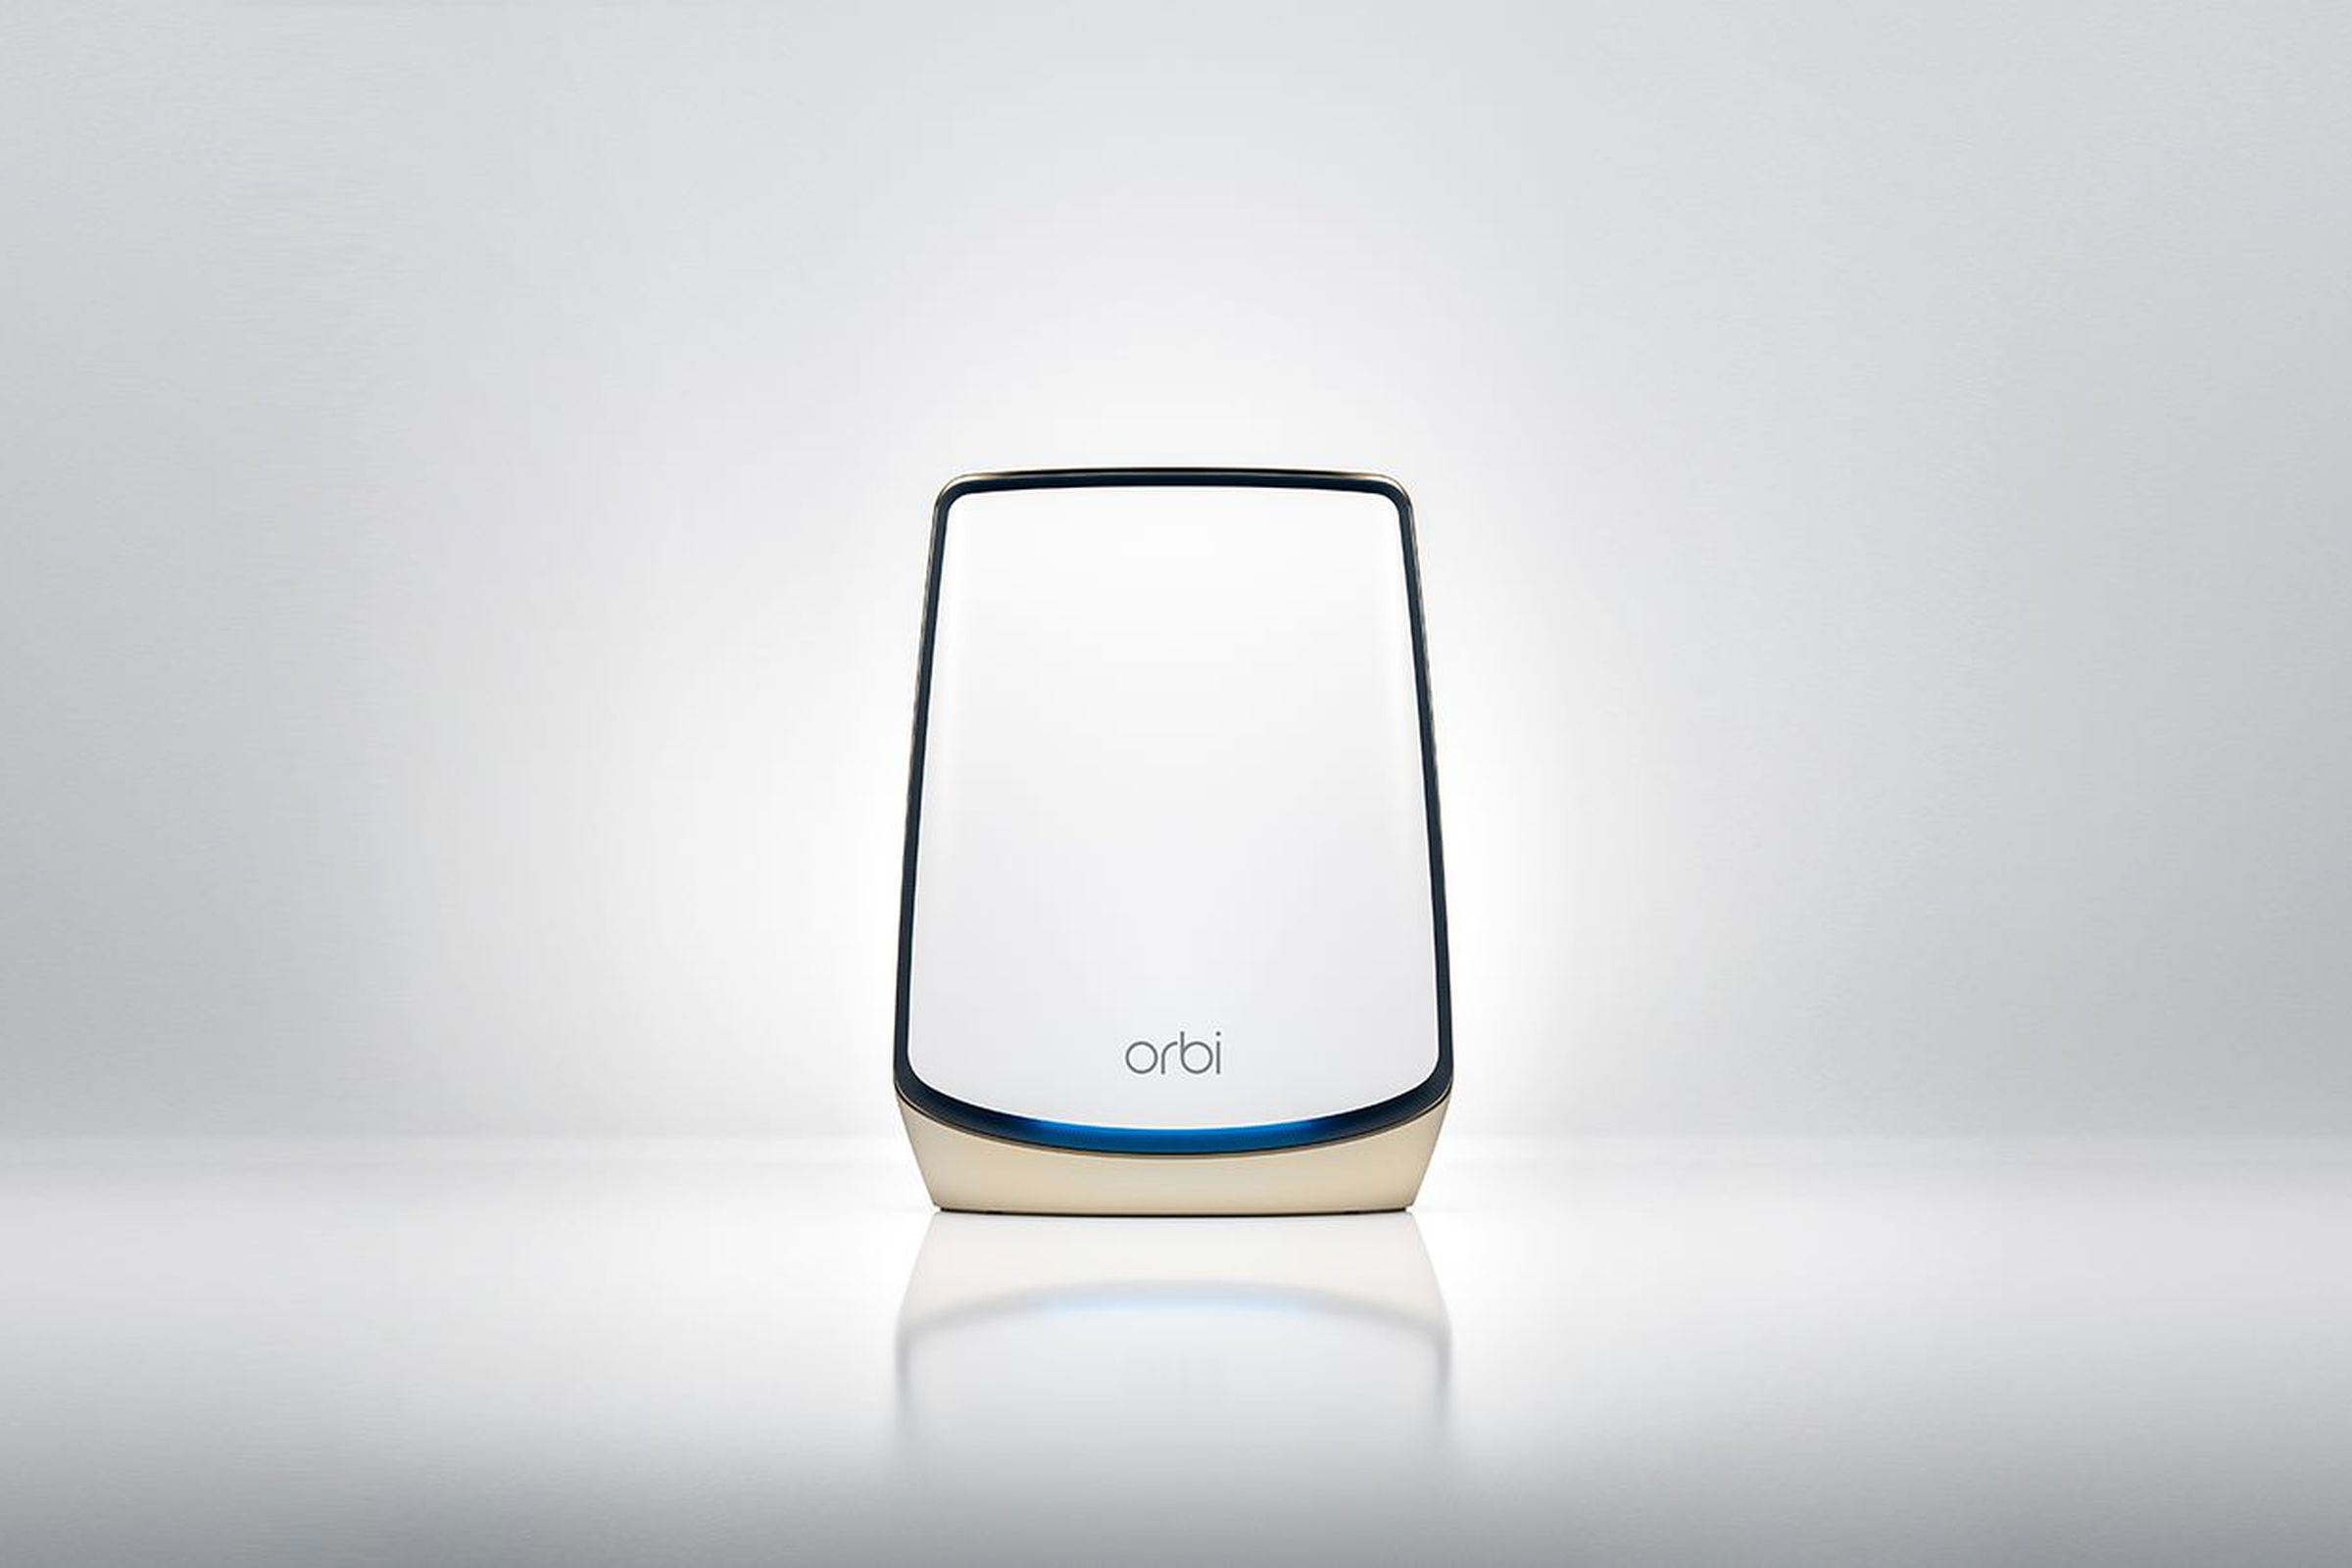 The Orbi 860 shown is a white satellite in a wine glass shaped silhouette in a grey background and has a black outline for the whole uniform body that is the antenna.